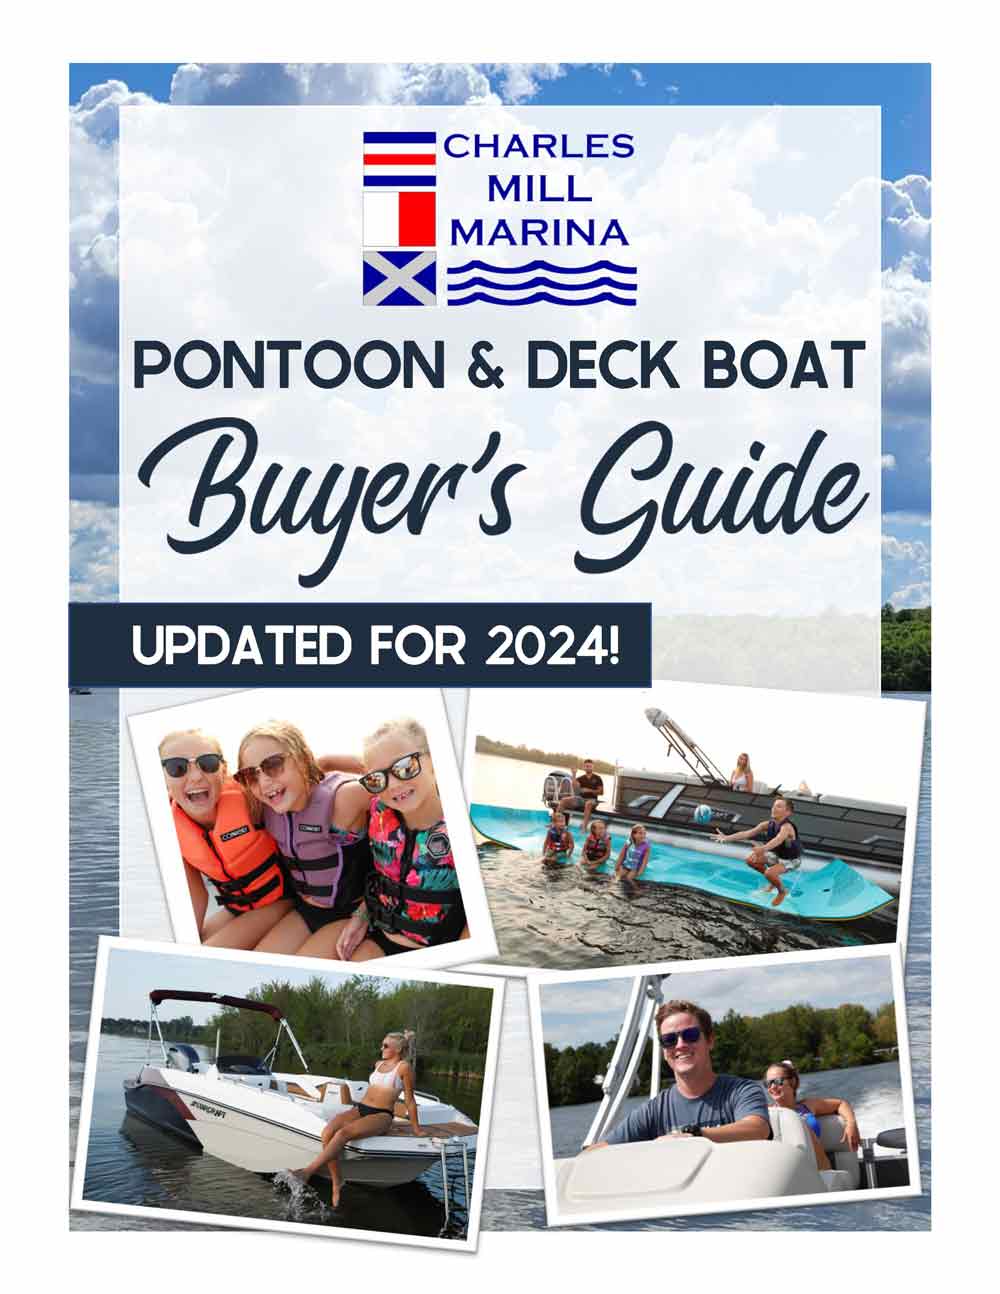 Charles Mill Marina Pontoon and Deck Boat Buyer's Guide